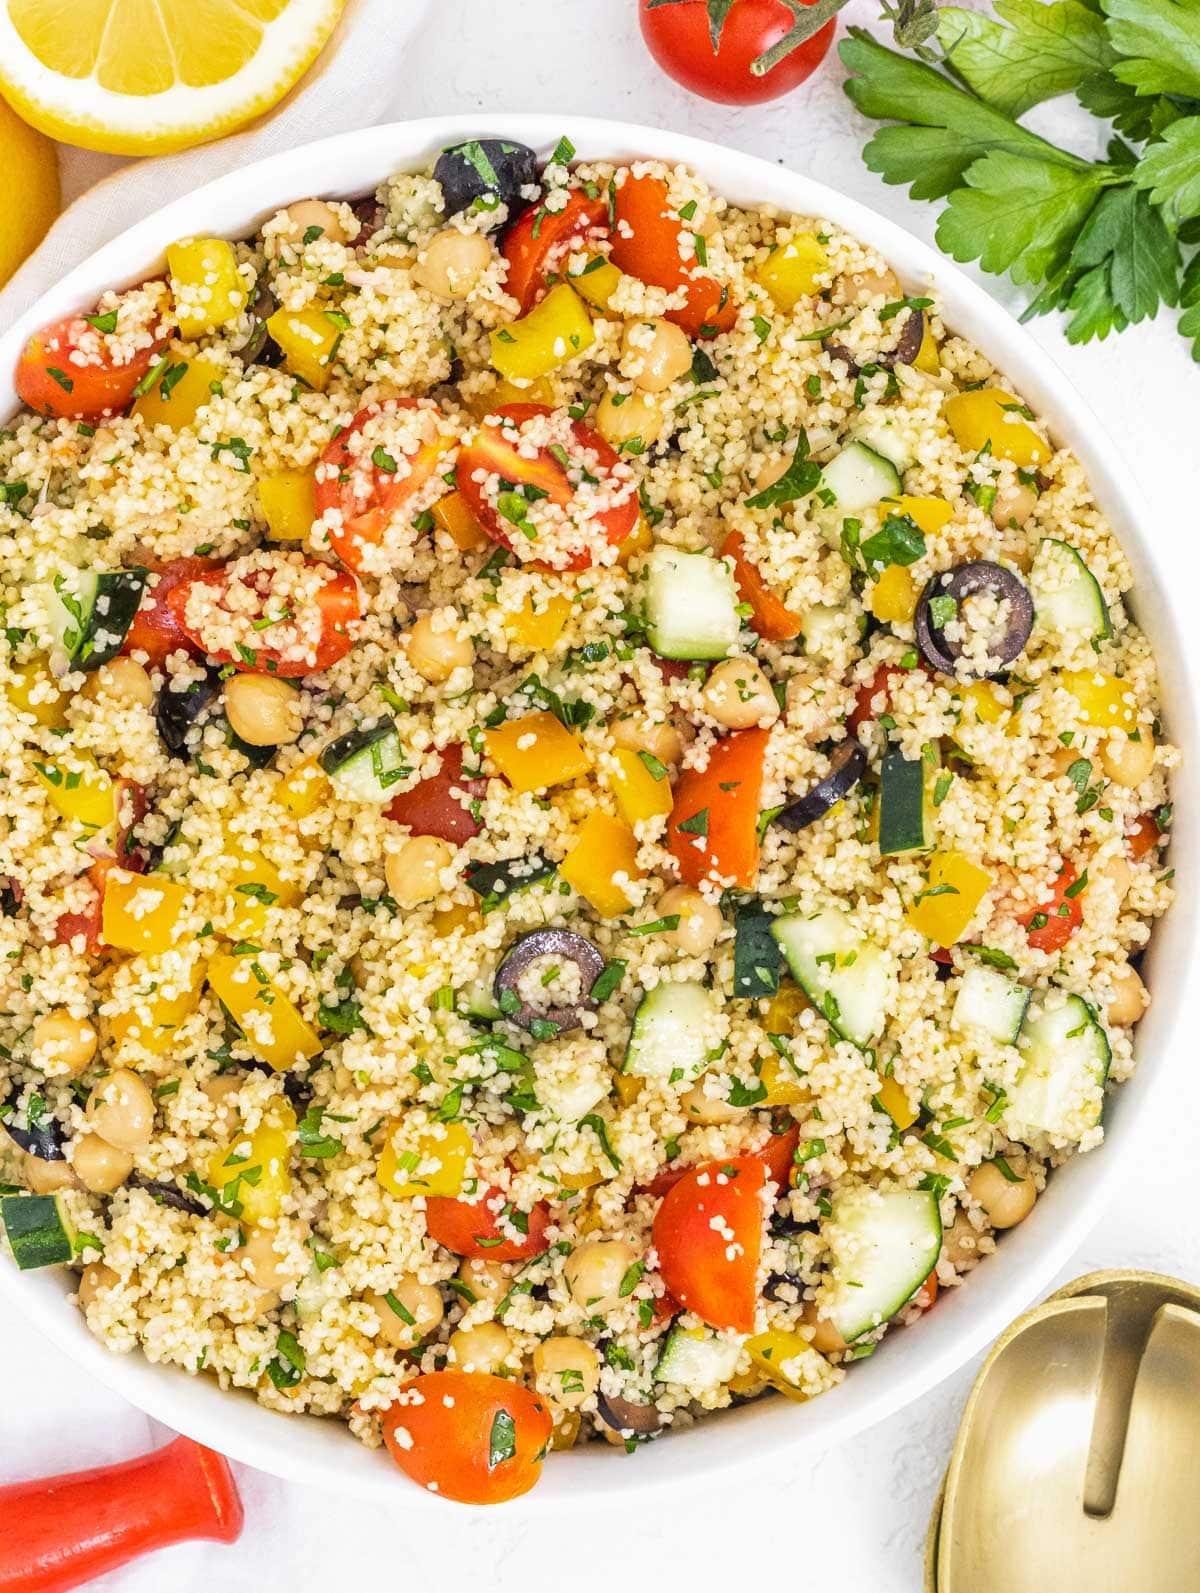 Couscous salad with lemon and parsley